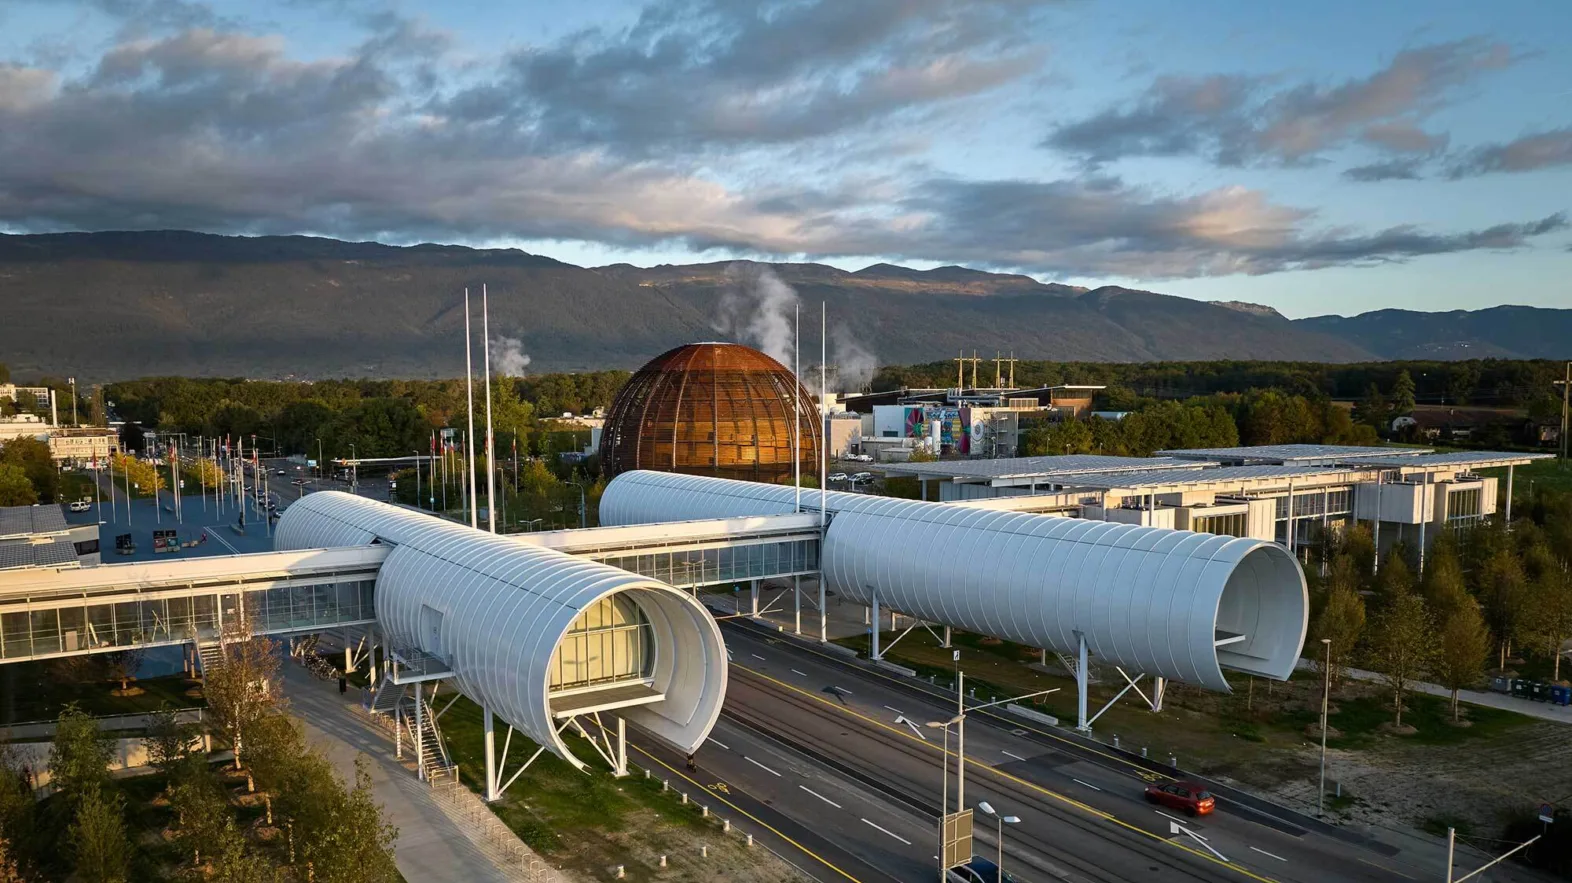 The CERN Science Gateway from outside